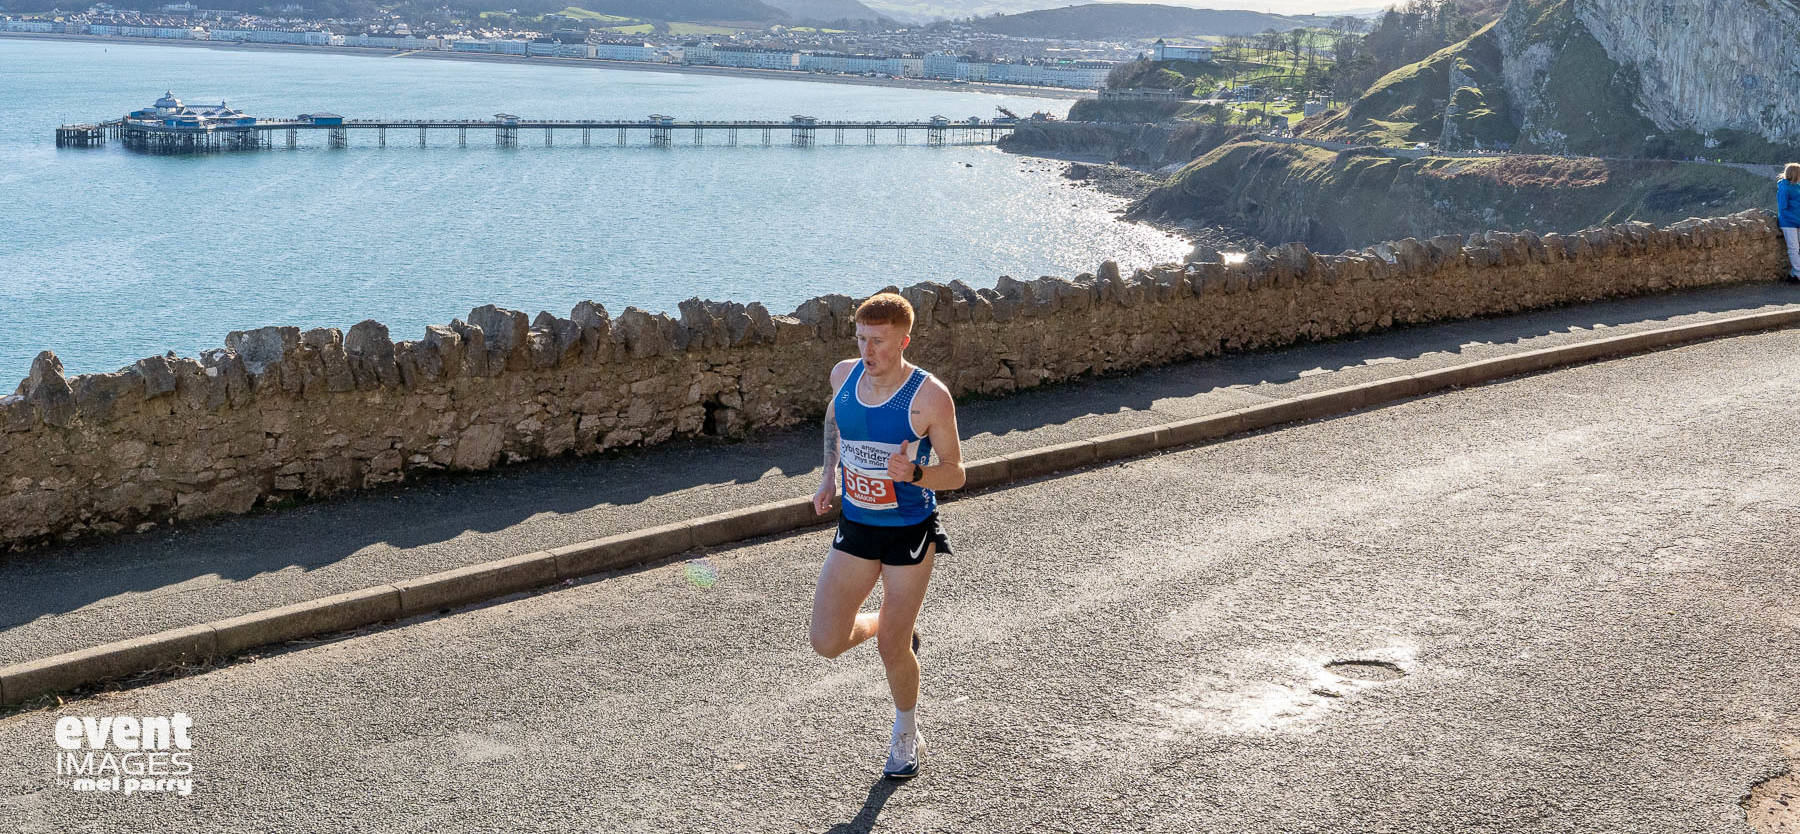 Runner in the Llandudno Nick Beer 10k with view of the pier